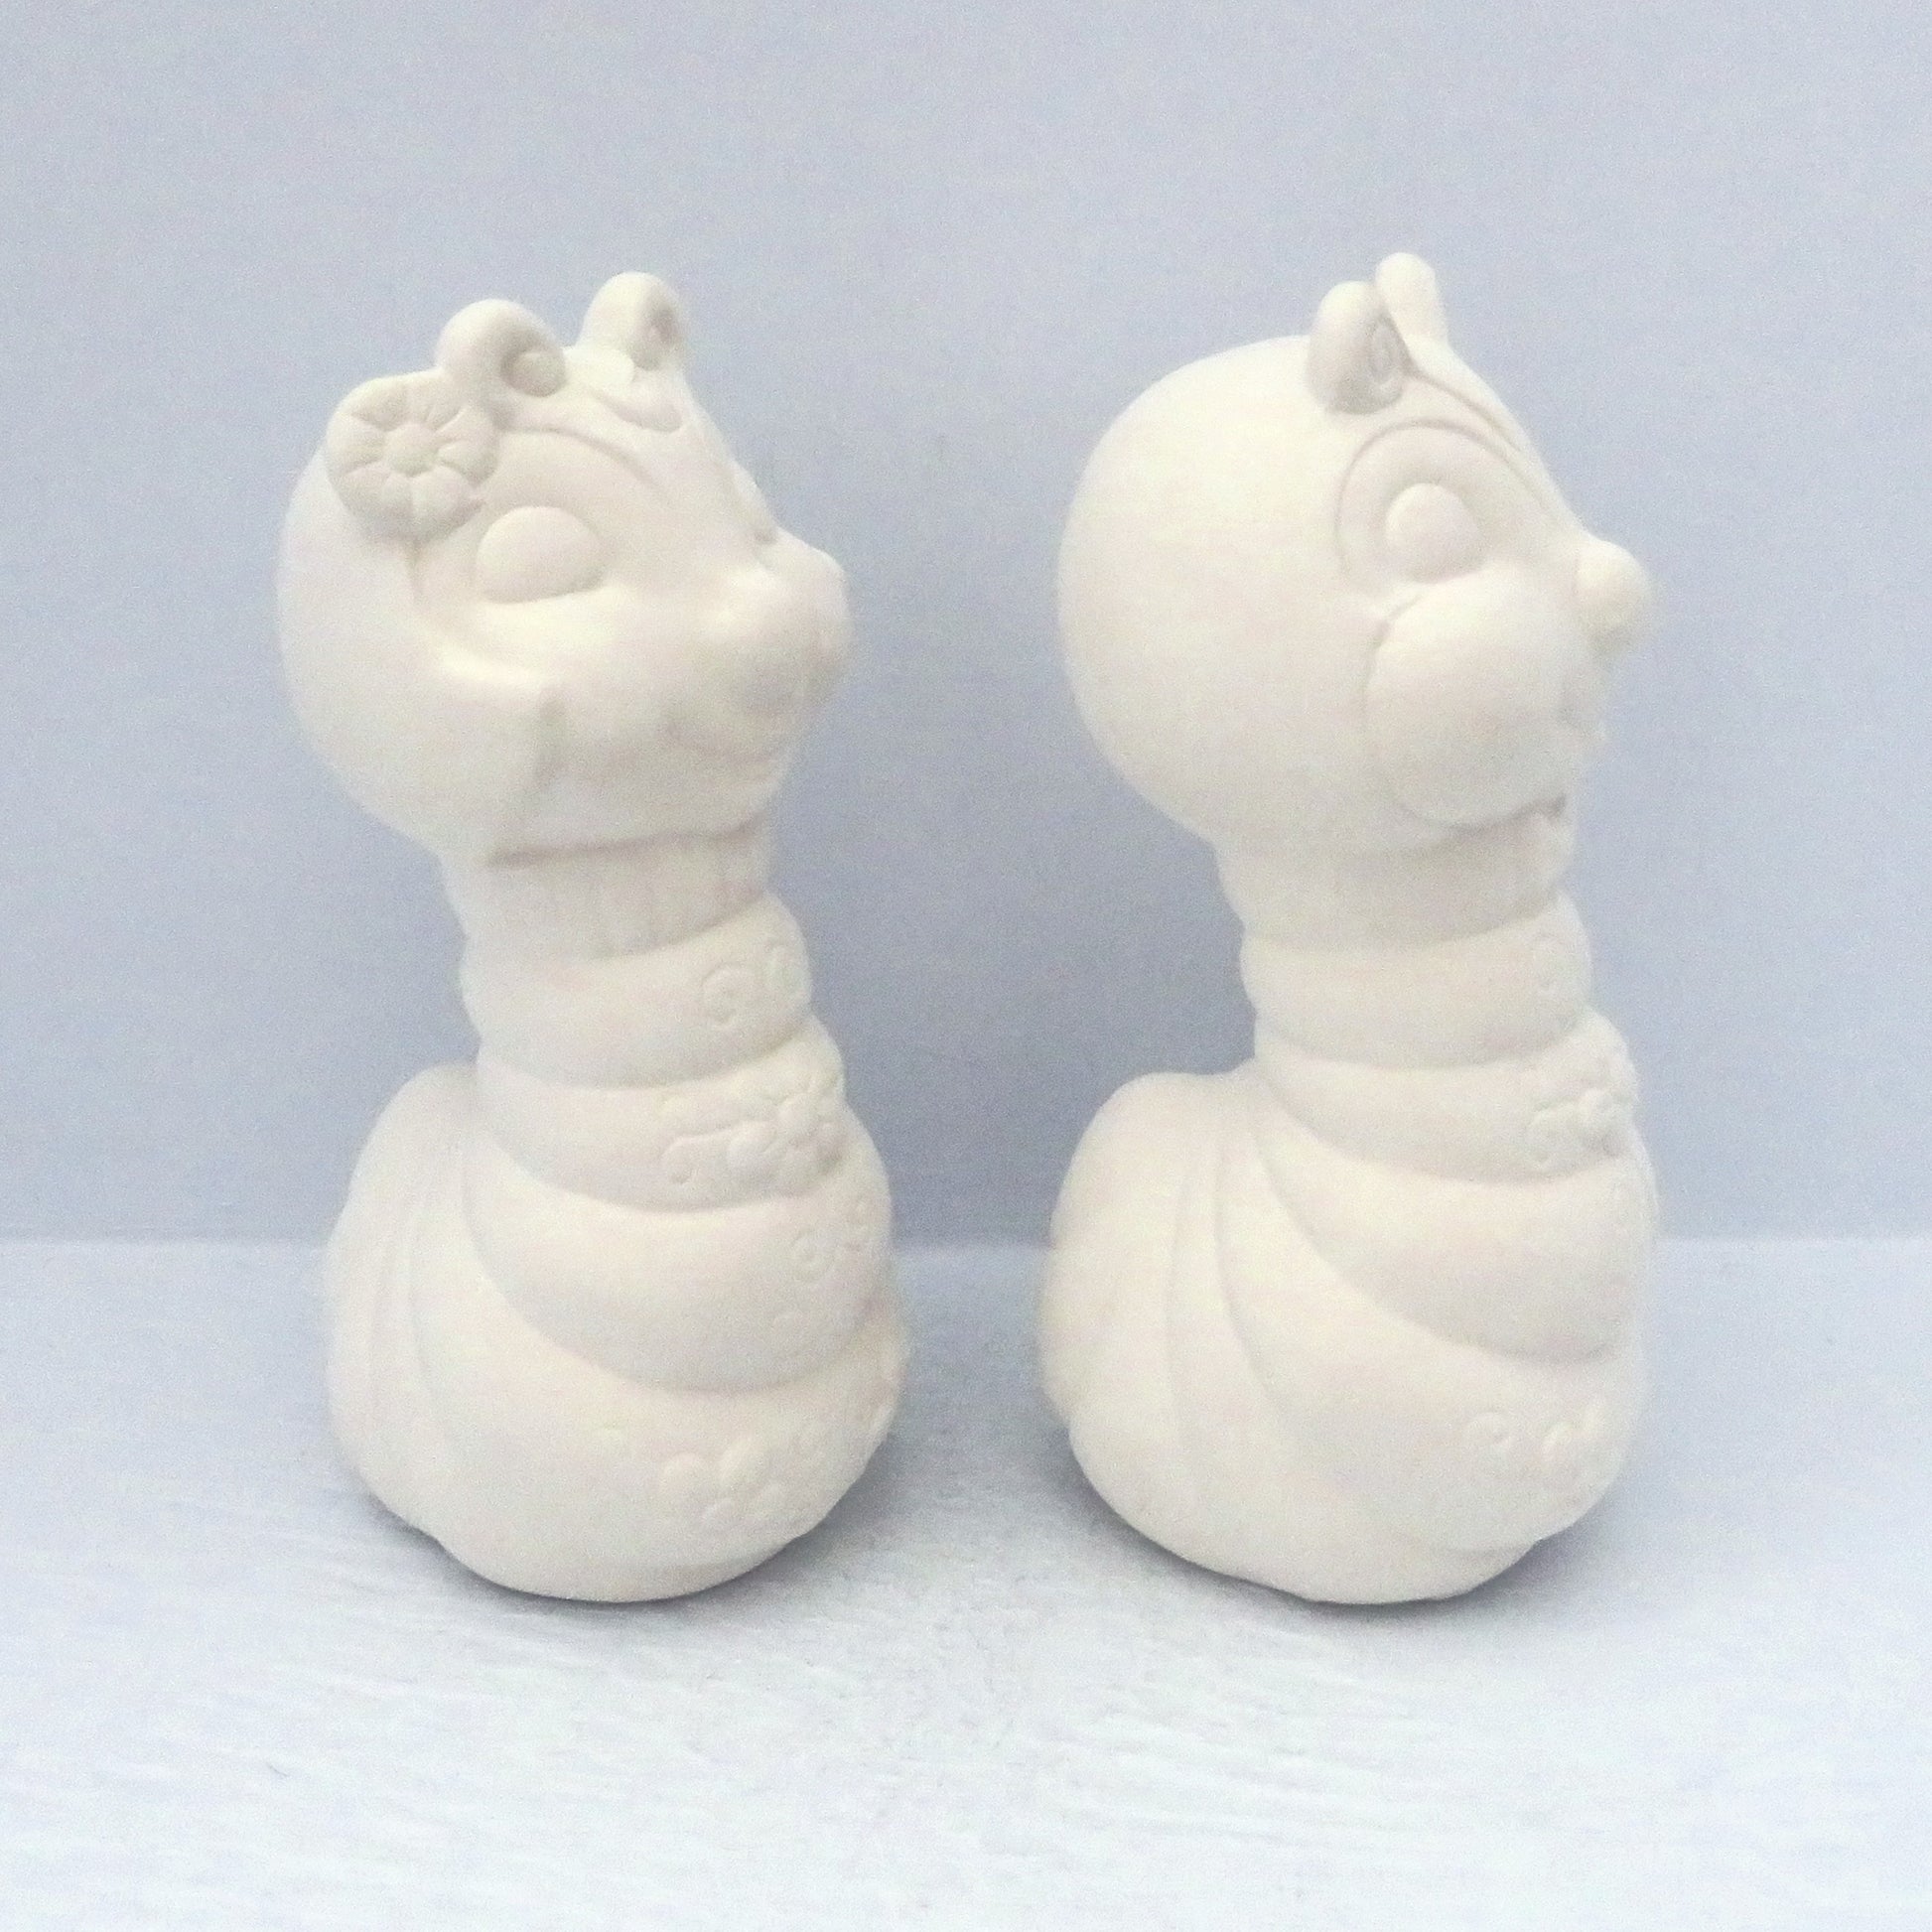 2 ready to paint ceramic bug statues facing to the right on a pale blue background